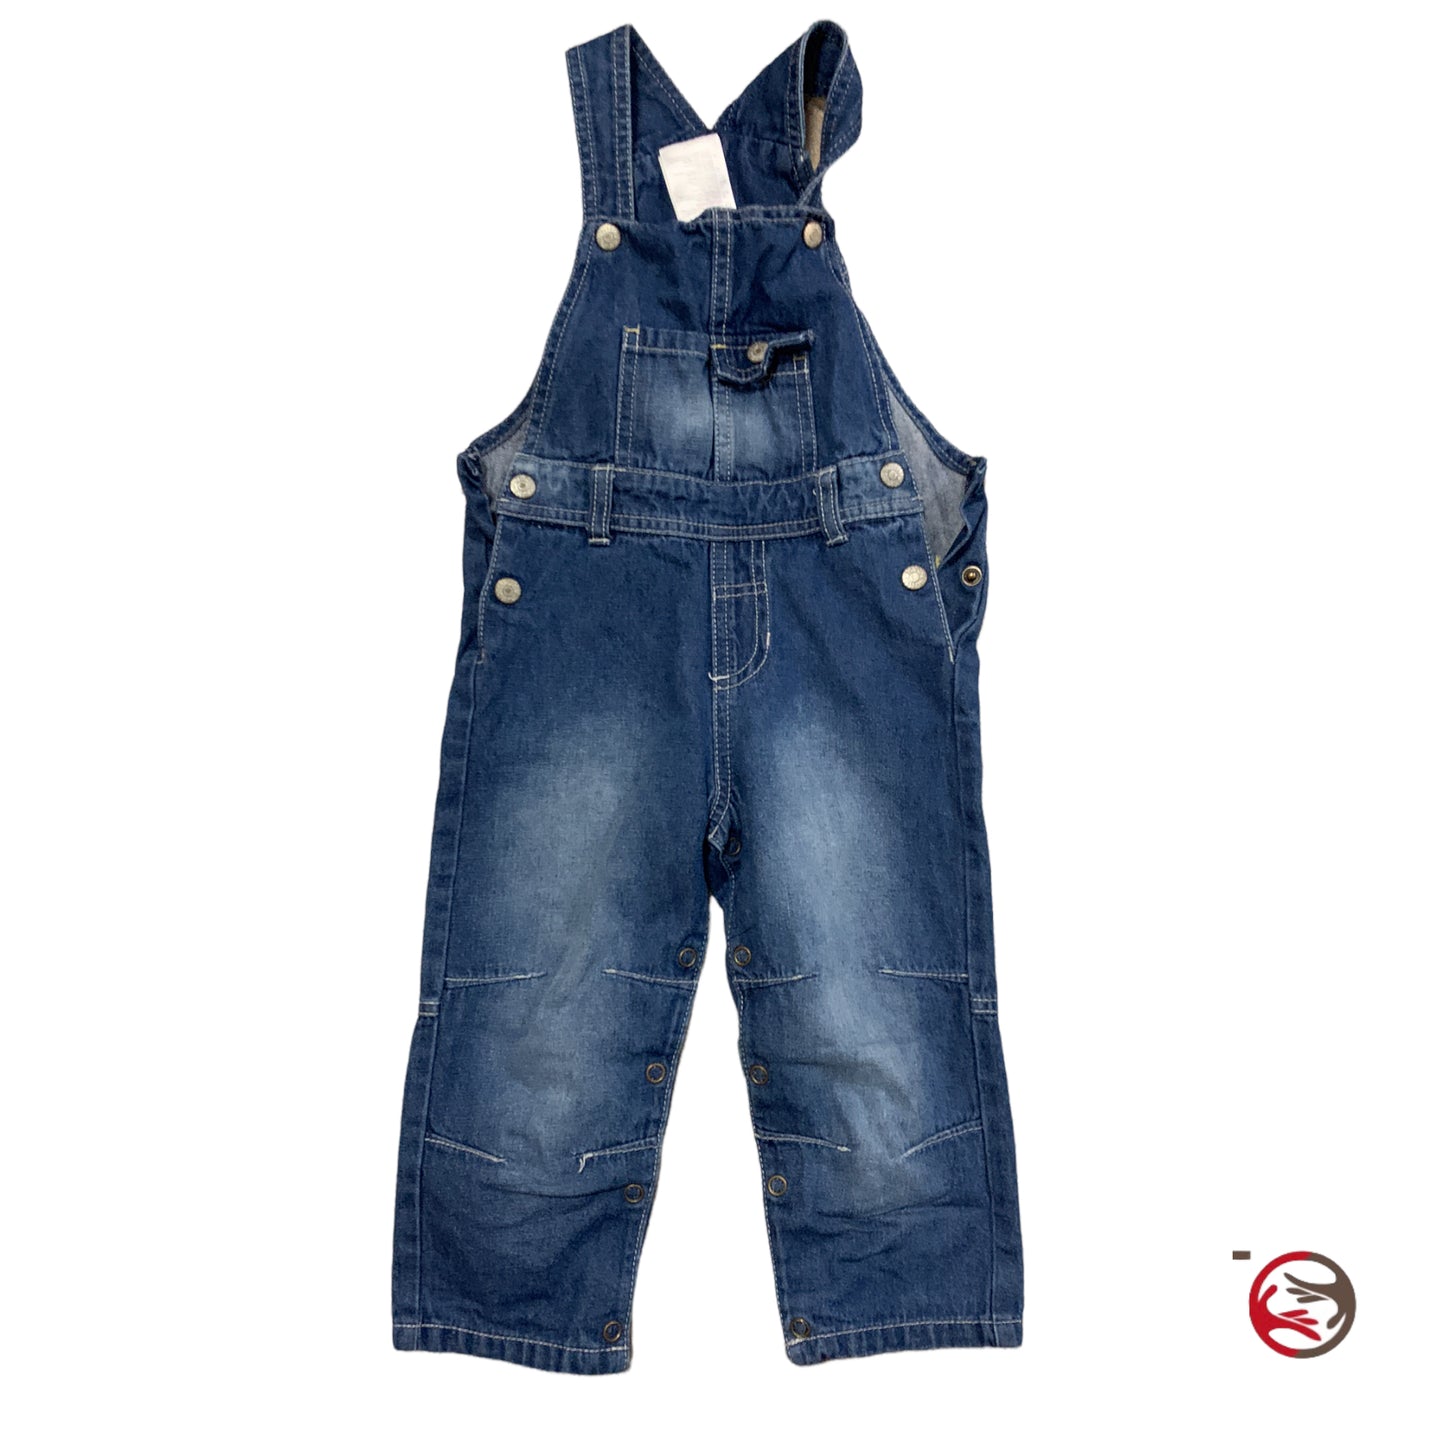 Overalls jeans trousers for 18 month baby